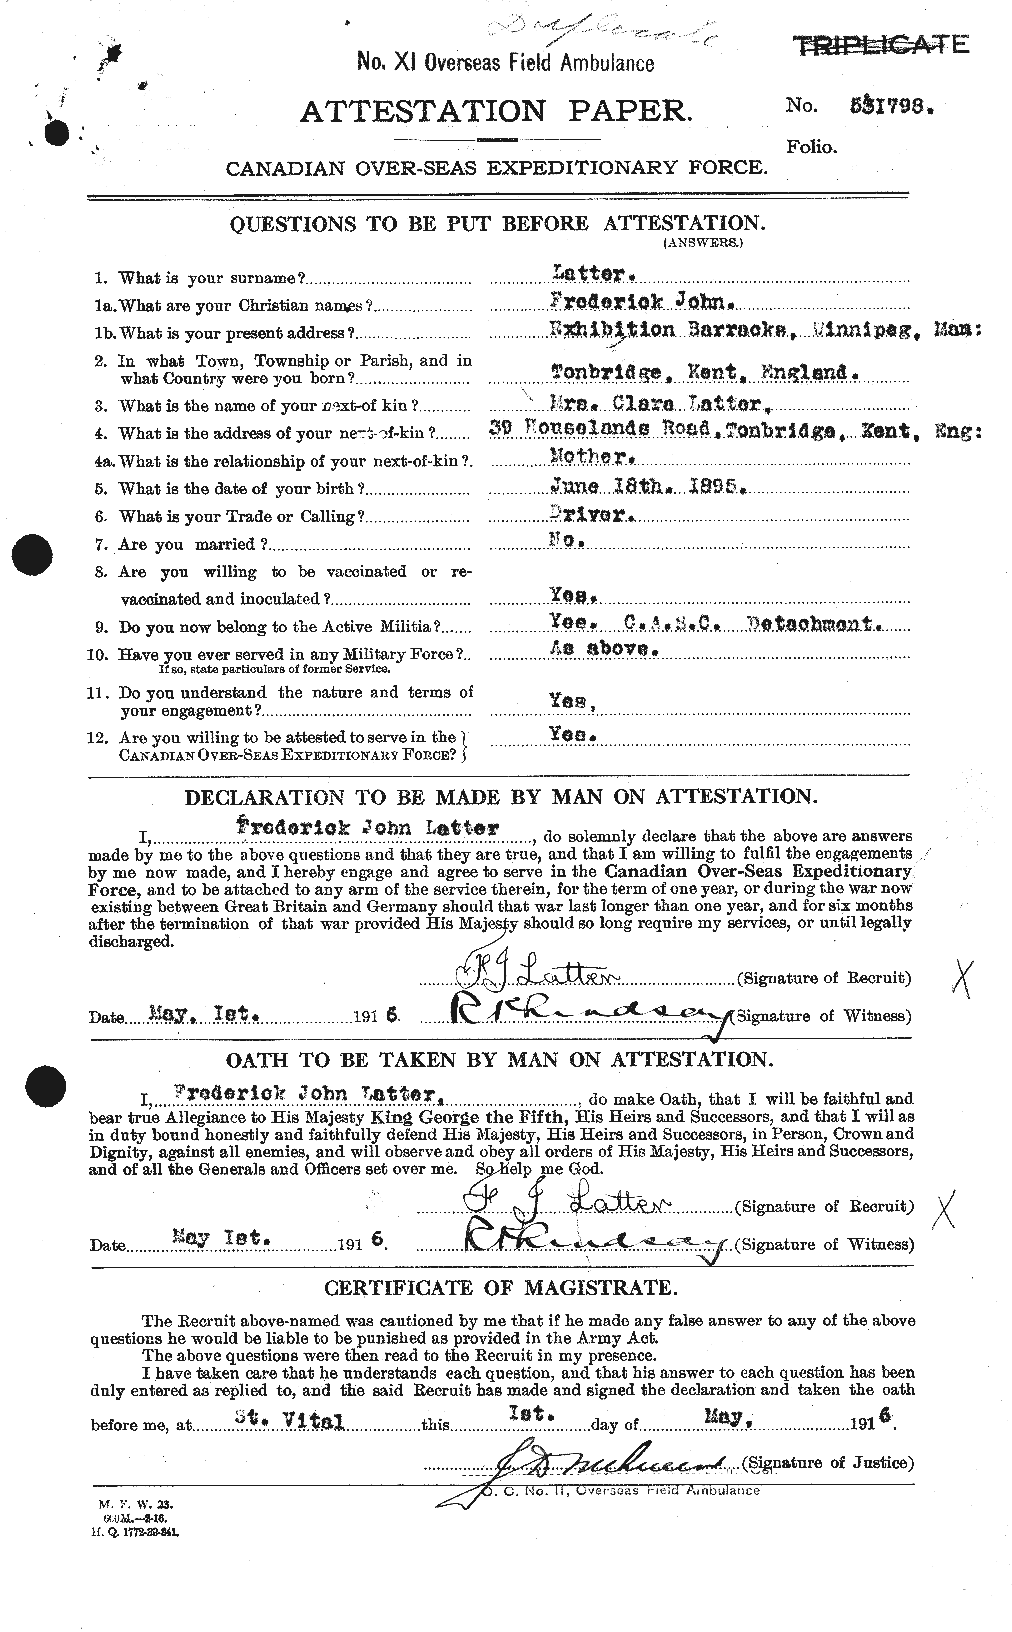 Personnel Records of the First World War - CEF 455340a